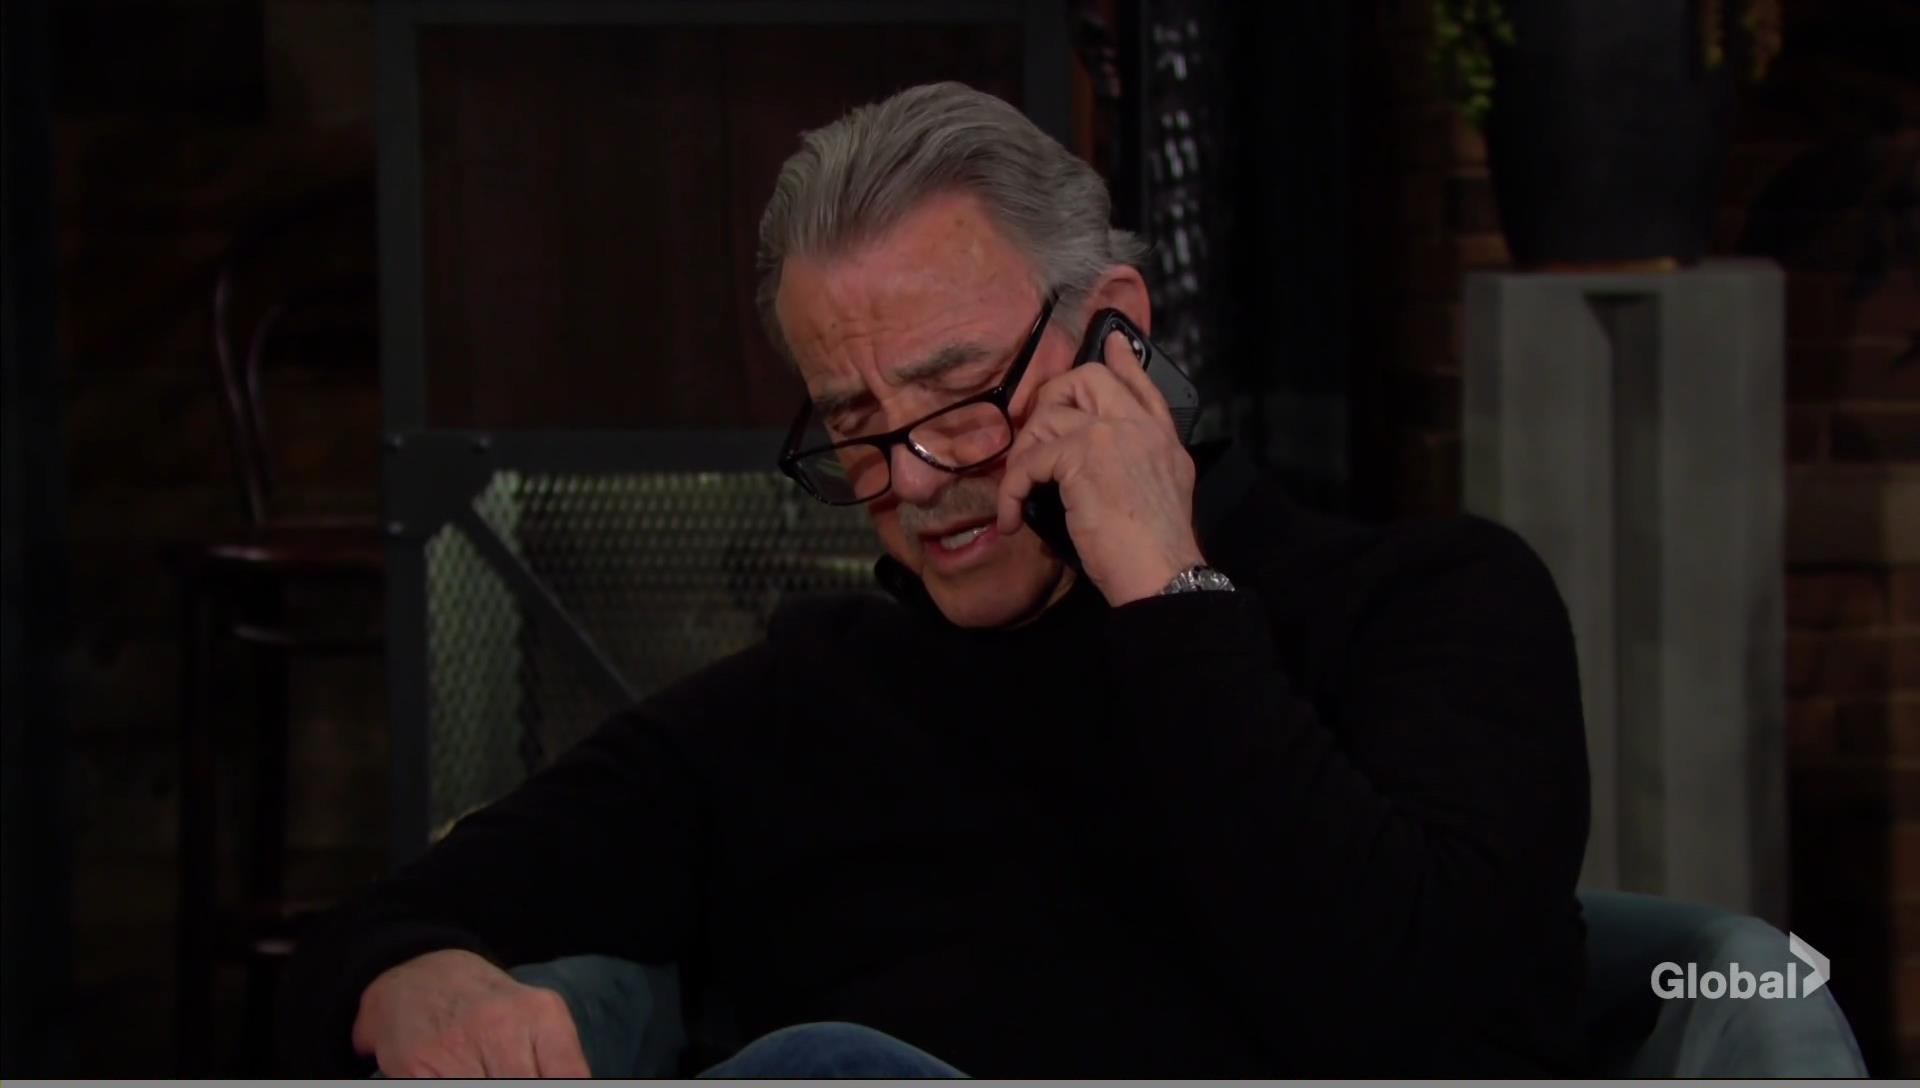 victor tells rey none business young restless